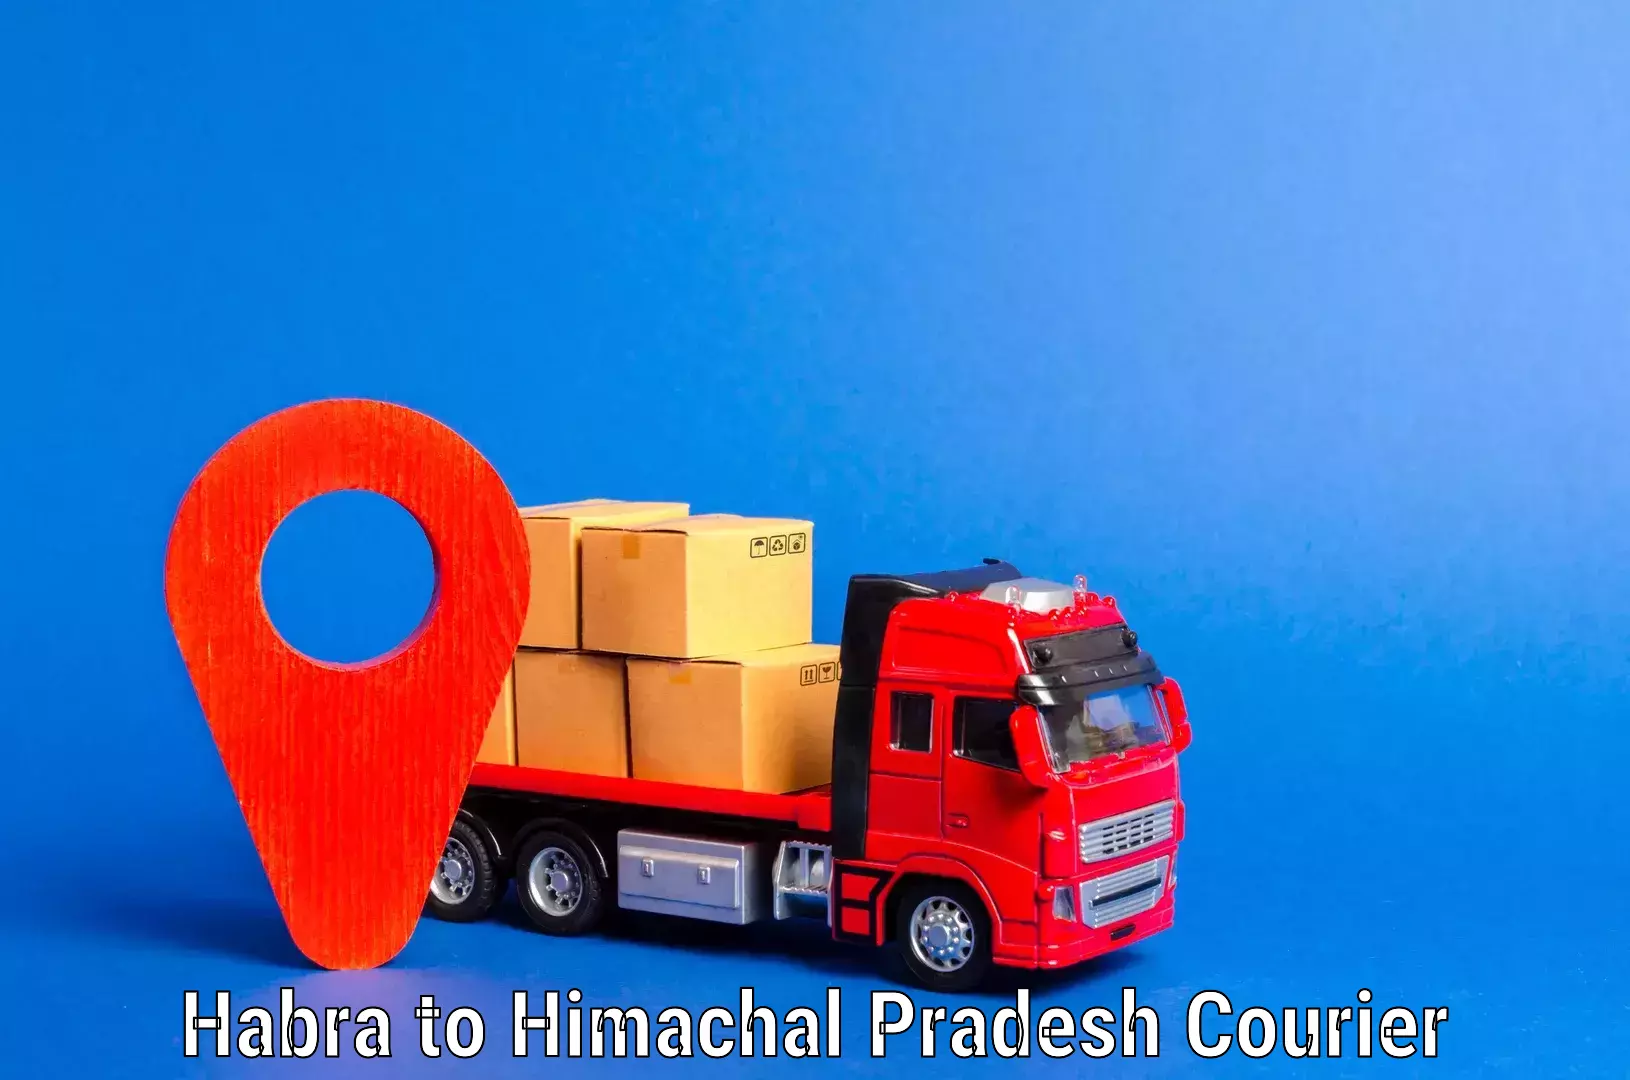 Trusted relocation experts Habra to Himachal Pradesh